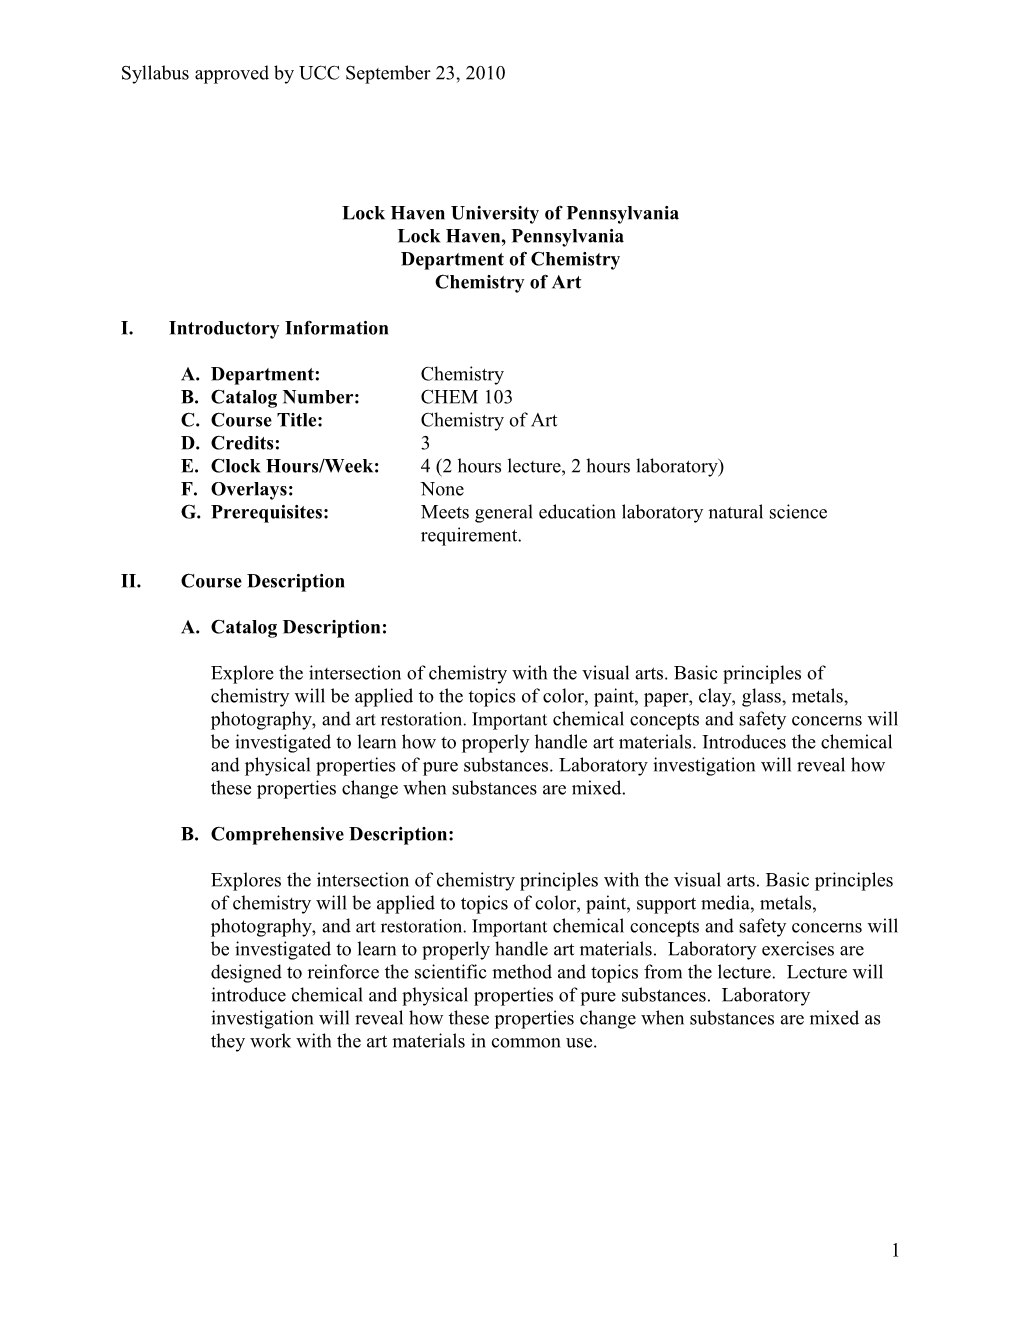 Syllabus Approved by UCC September 23, 2010